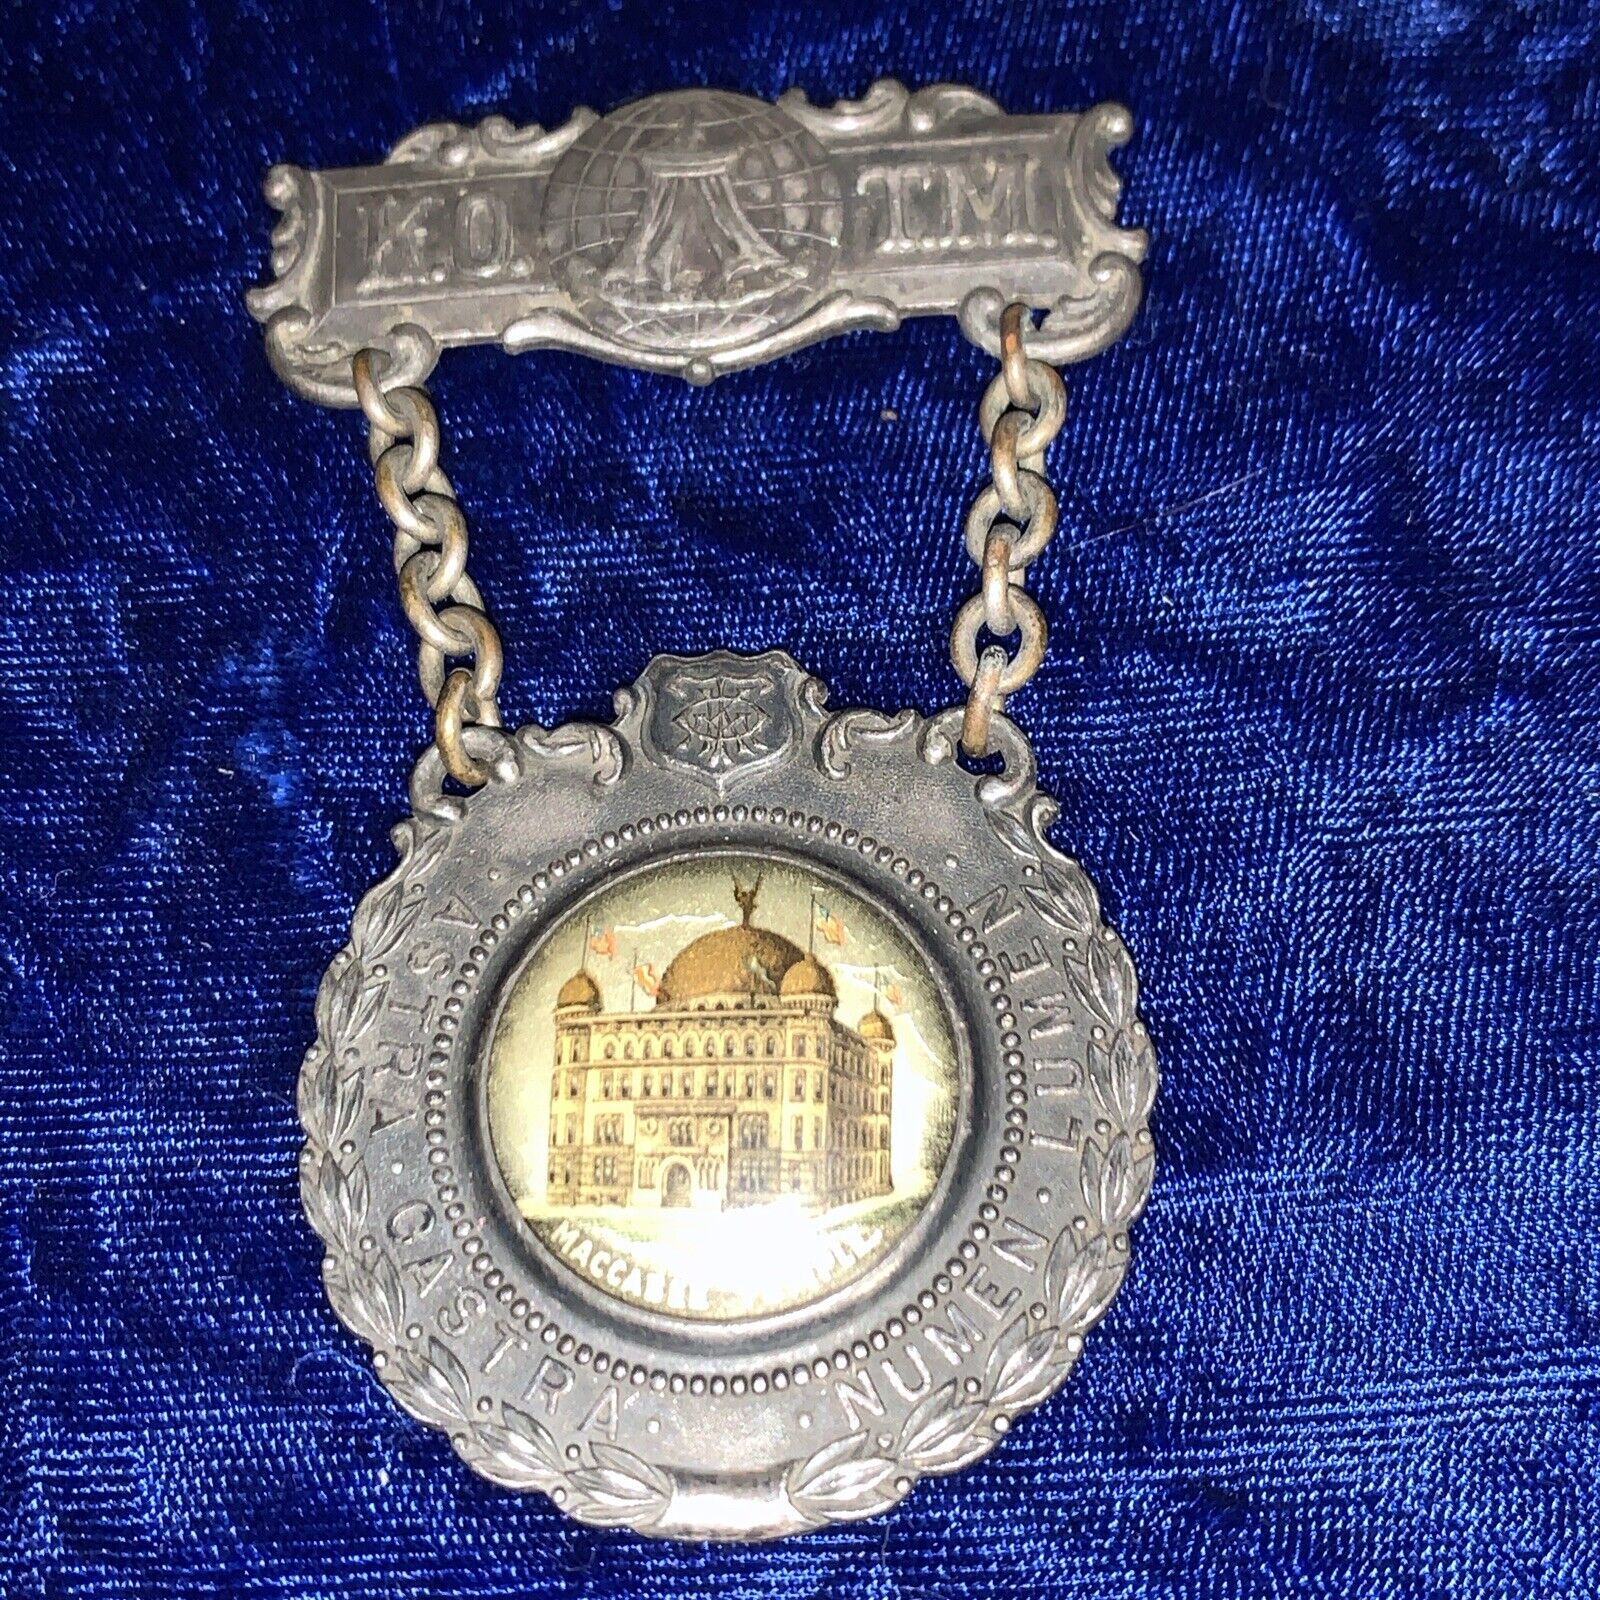 Late 19th Early 20th C Knights of the Maccabees Medal Celluloid Maccabee Temple